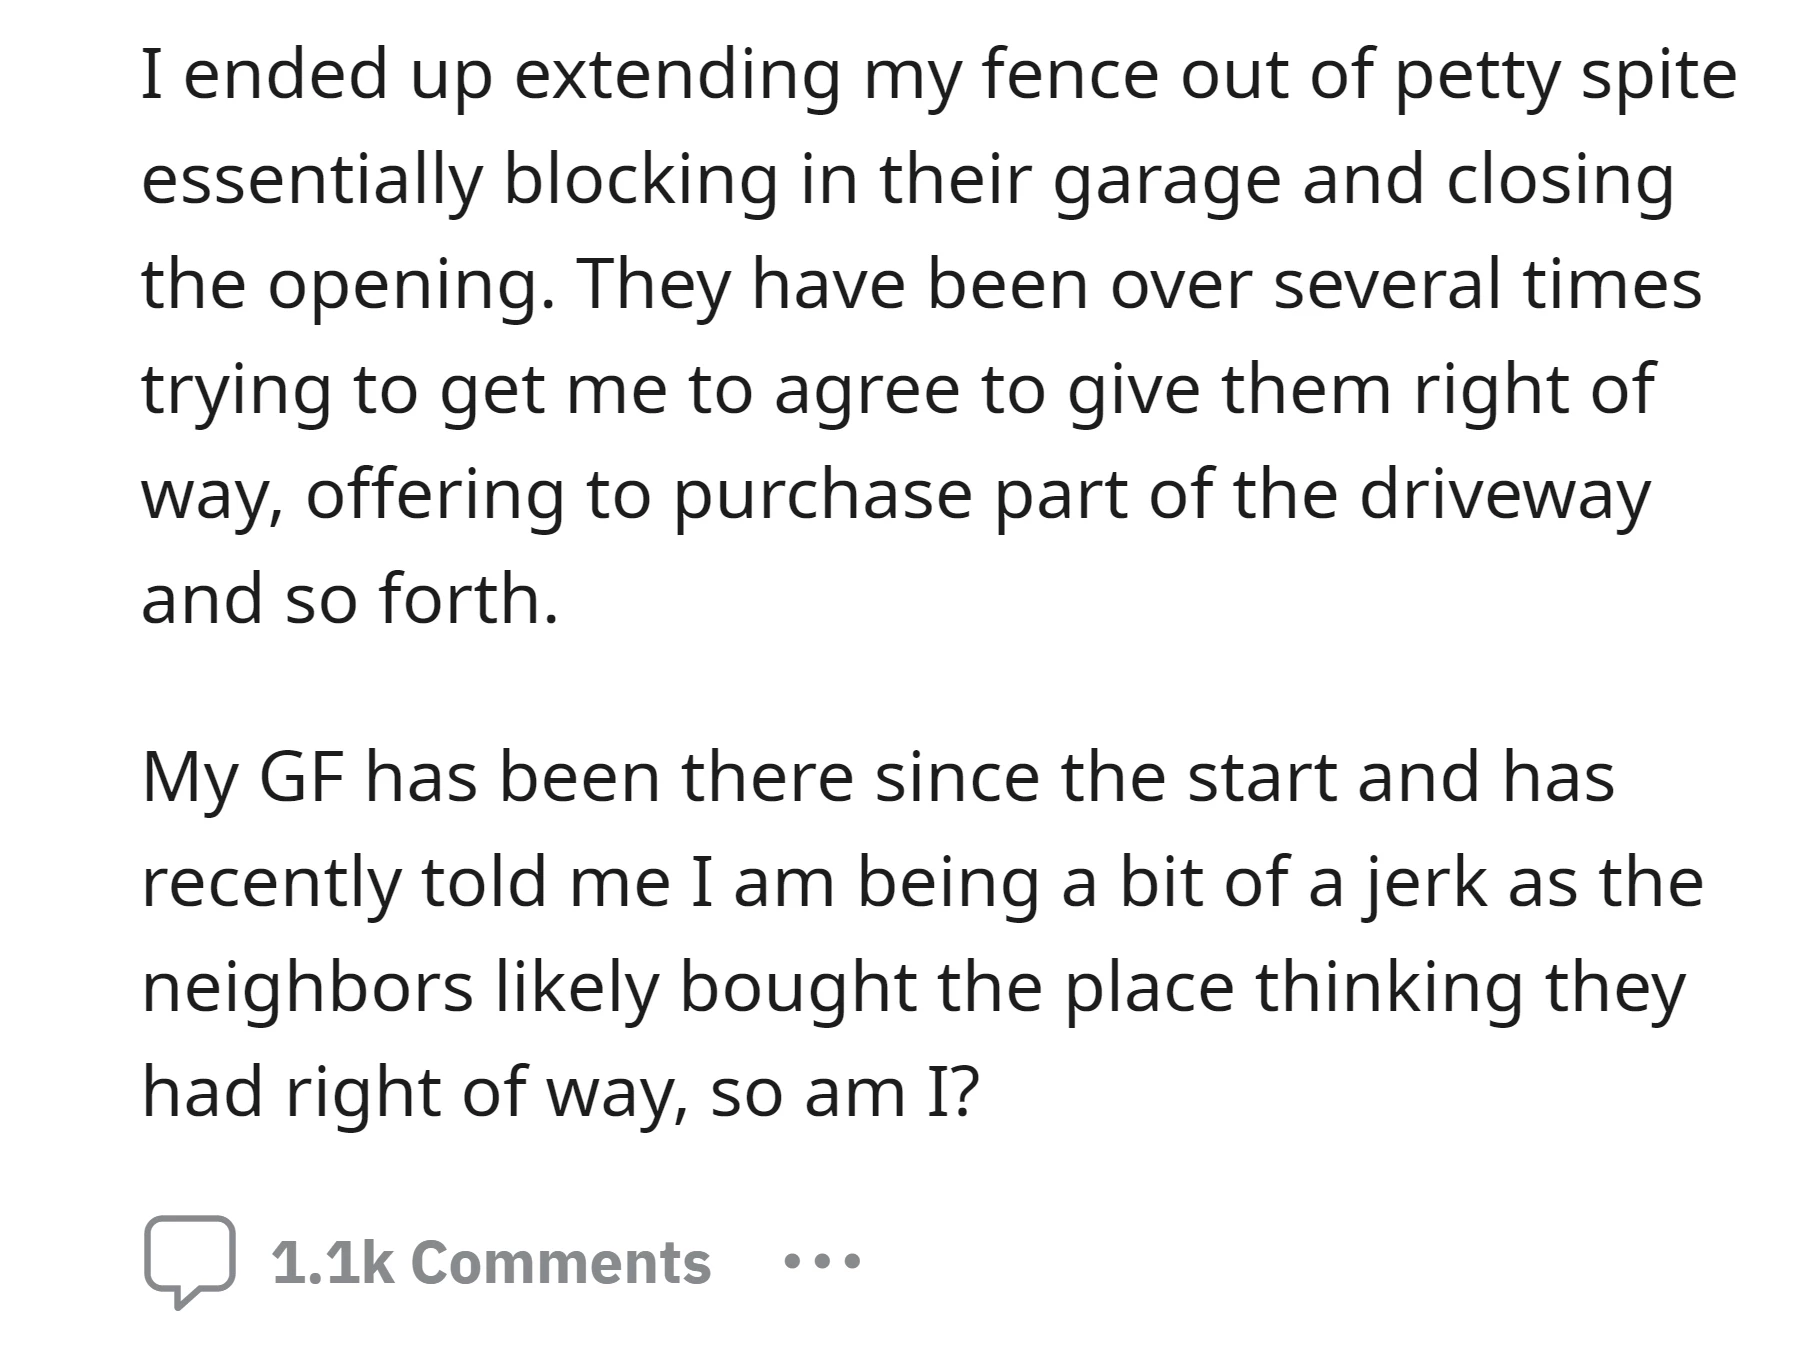 OP extended his fence to block the neighbor's garage